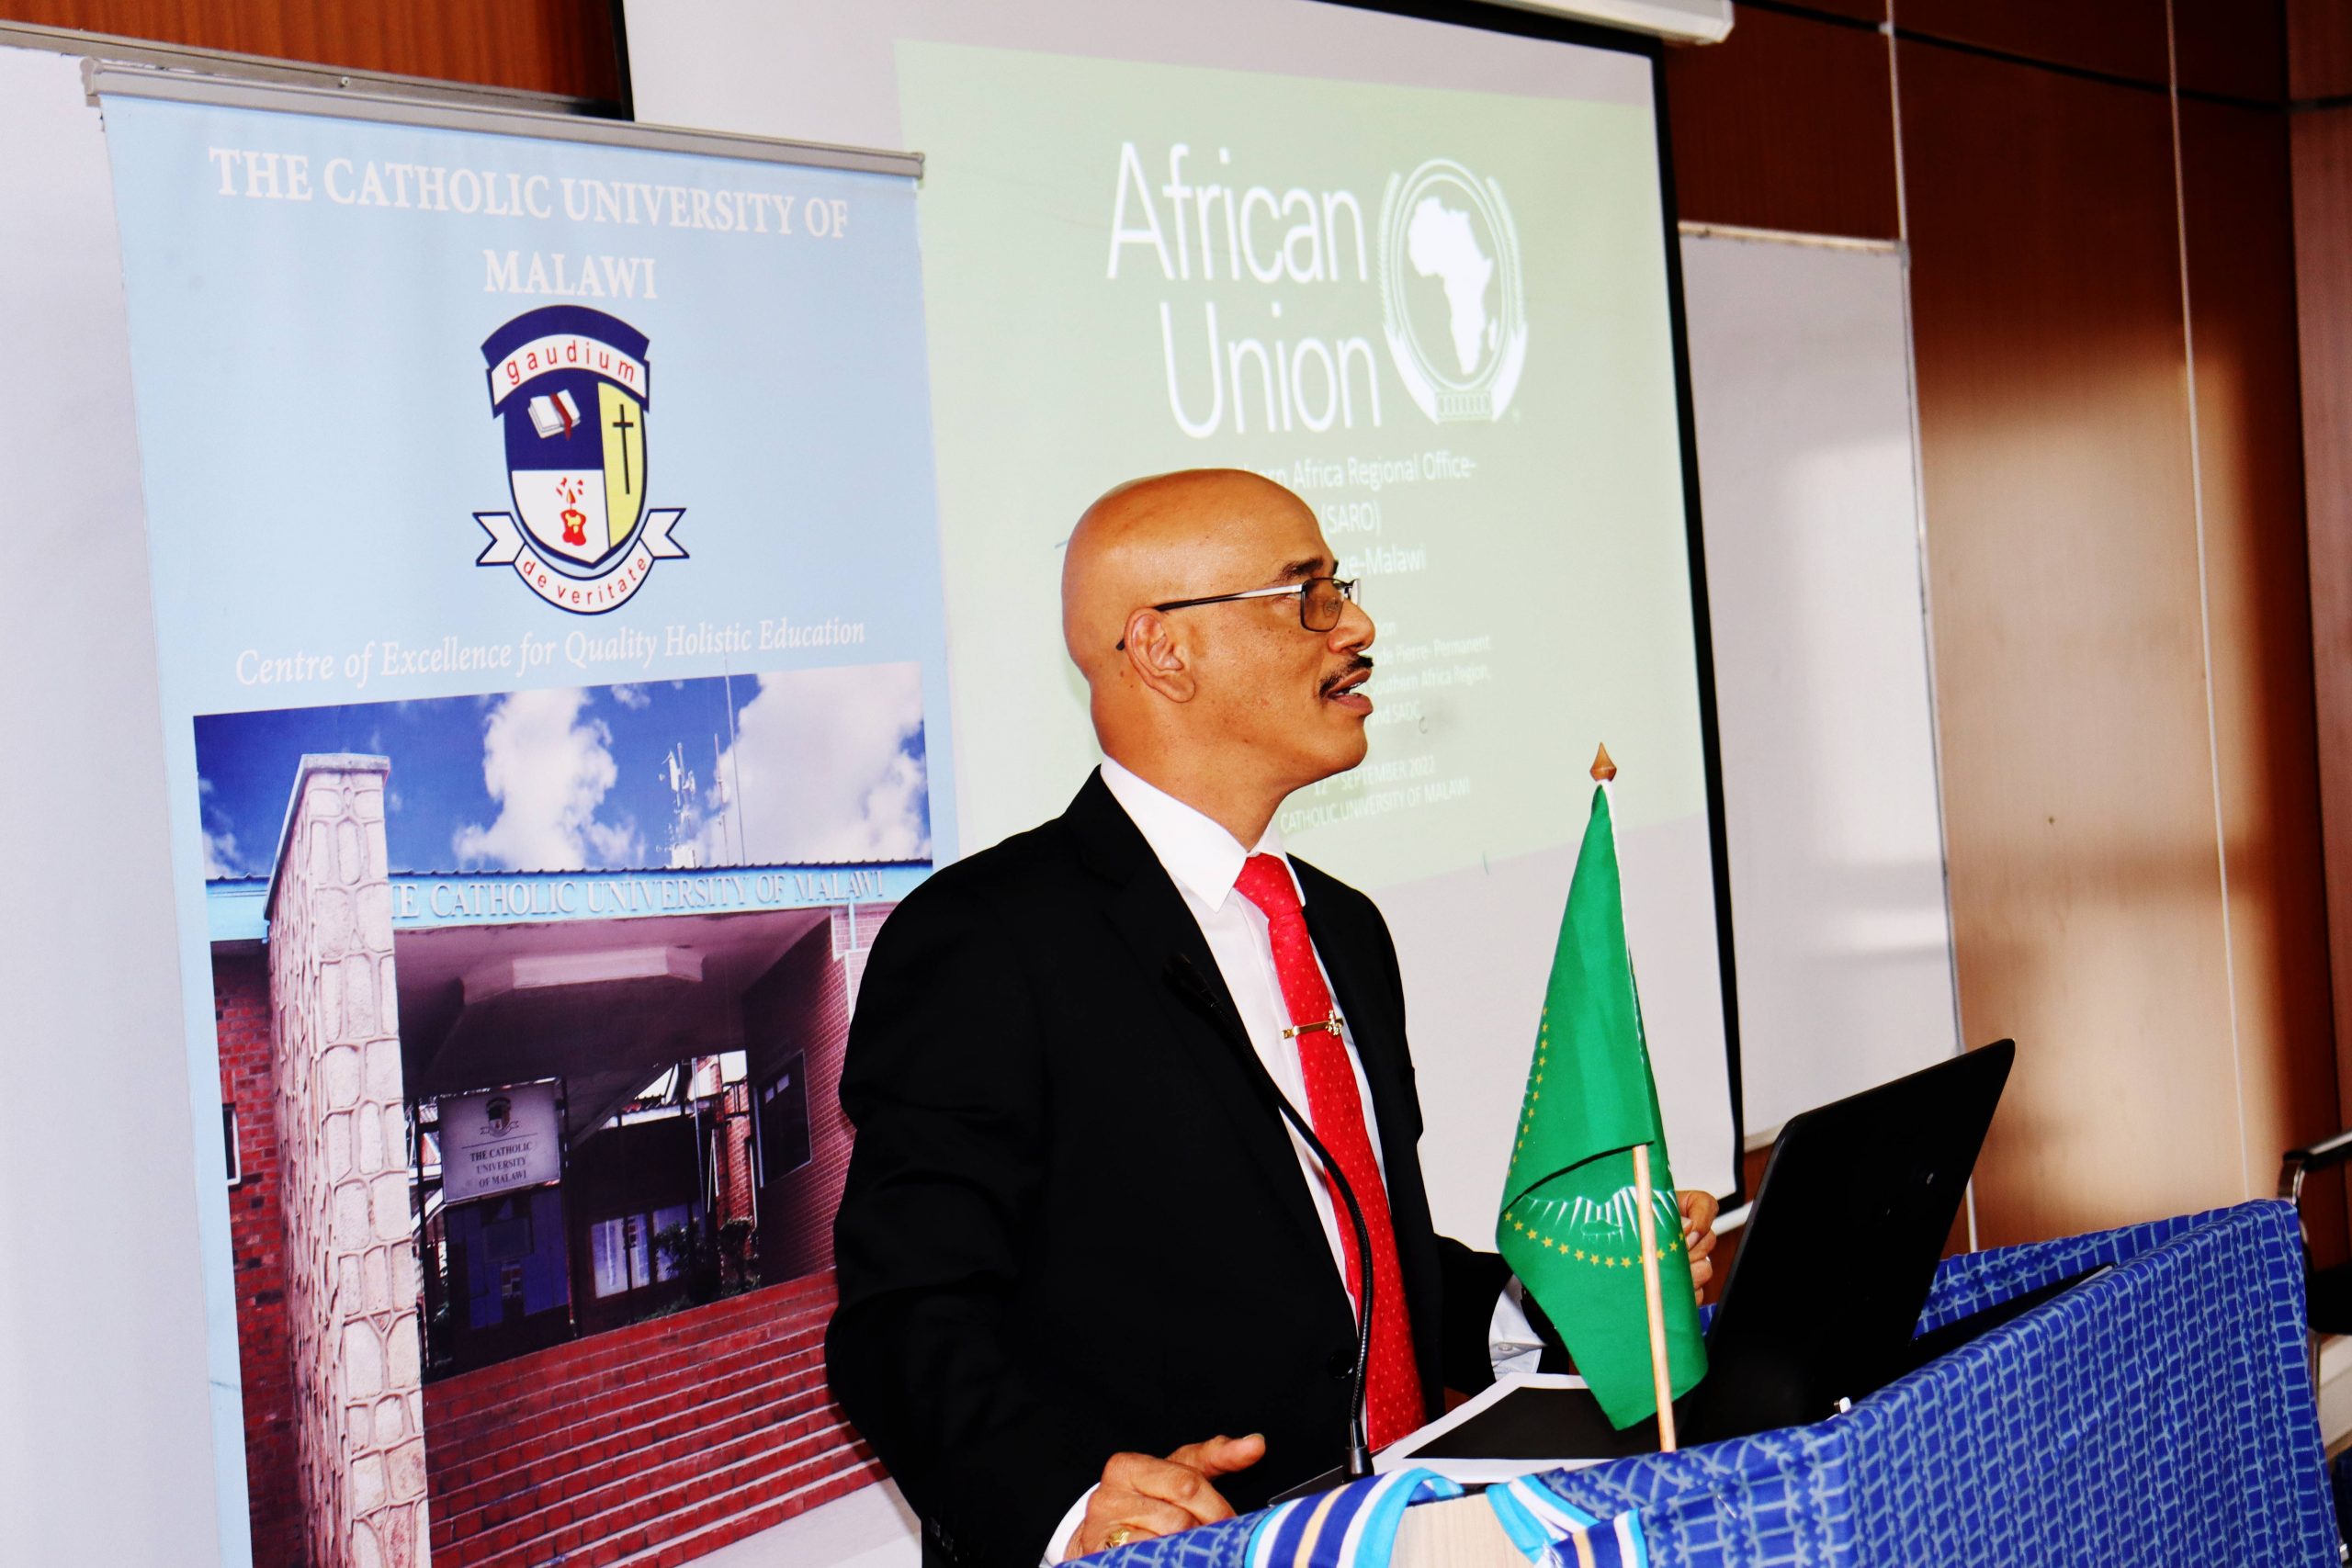 African Union Rep urges CUNIMA Students to serve Africa